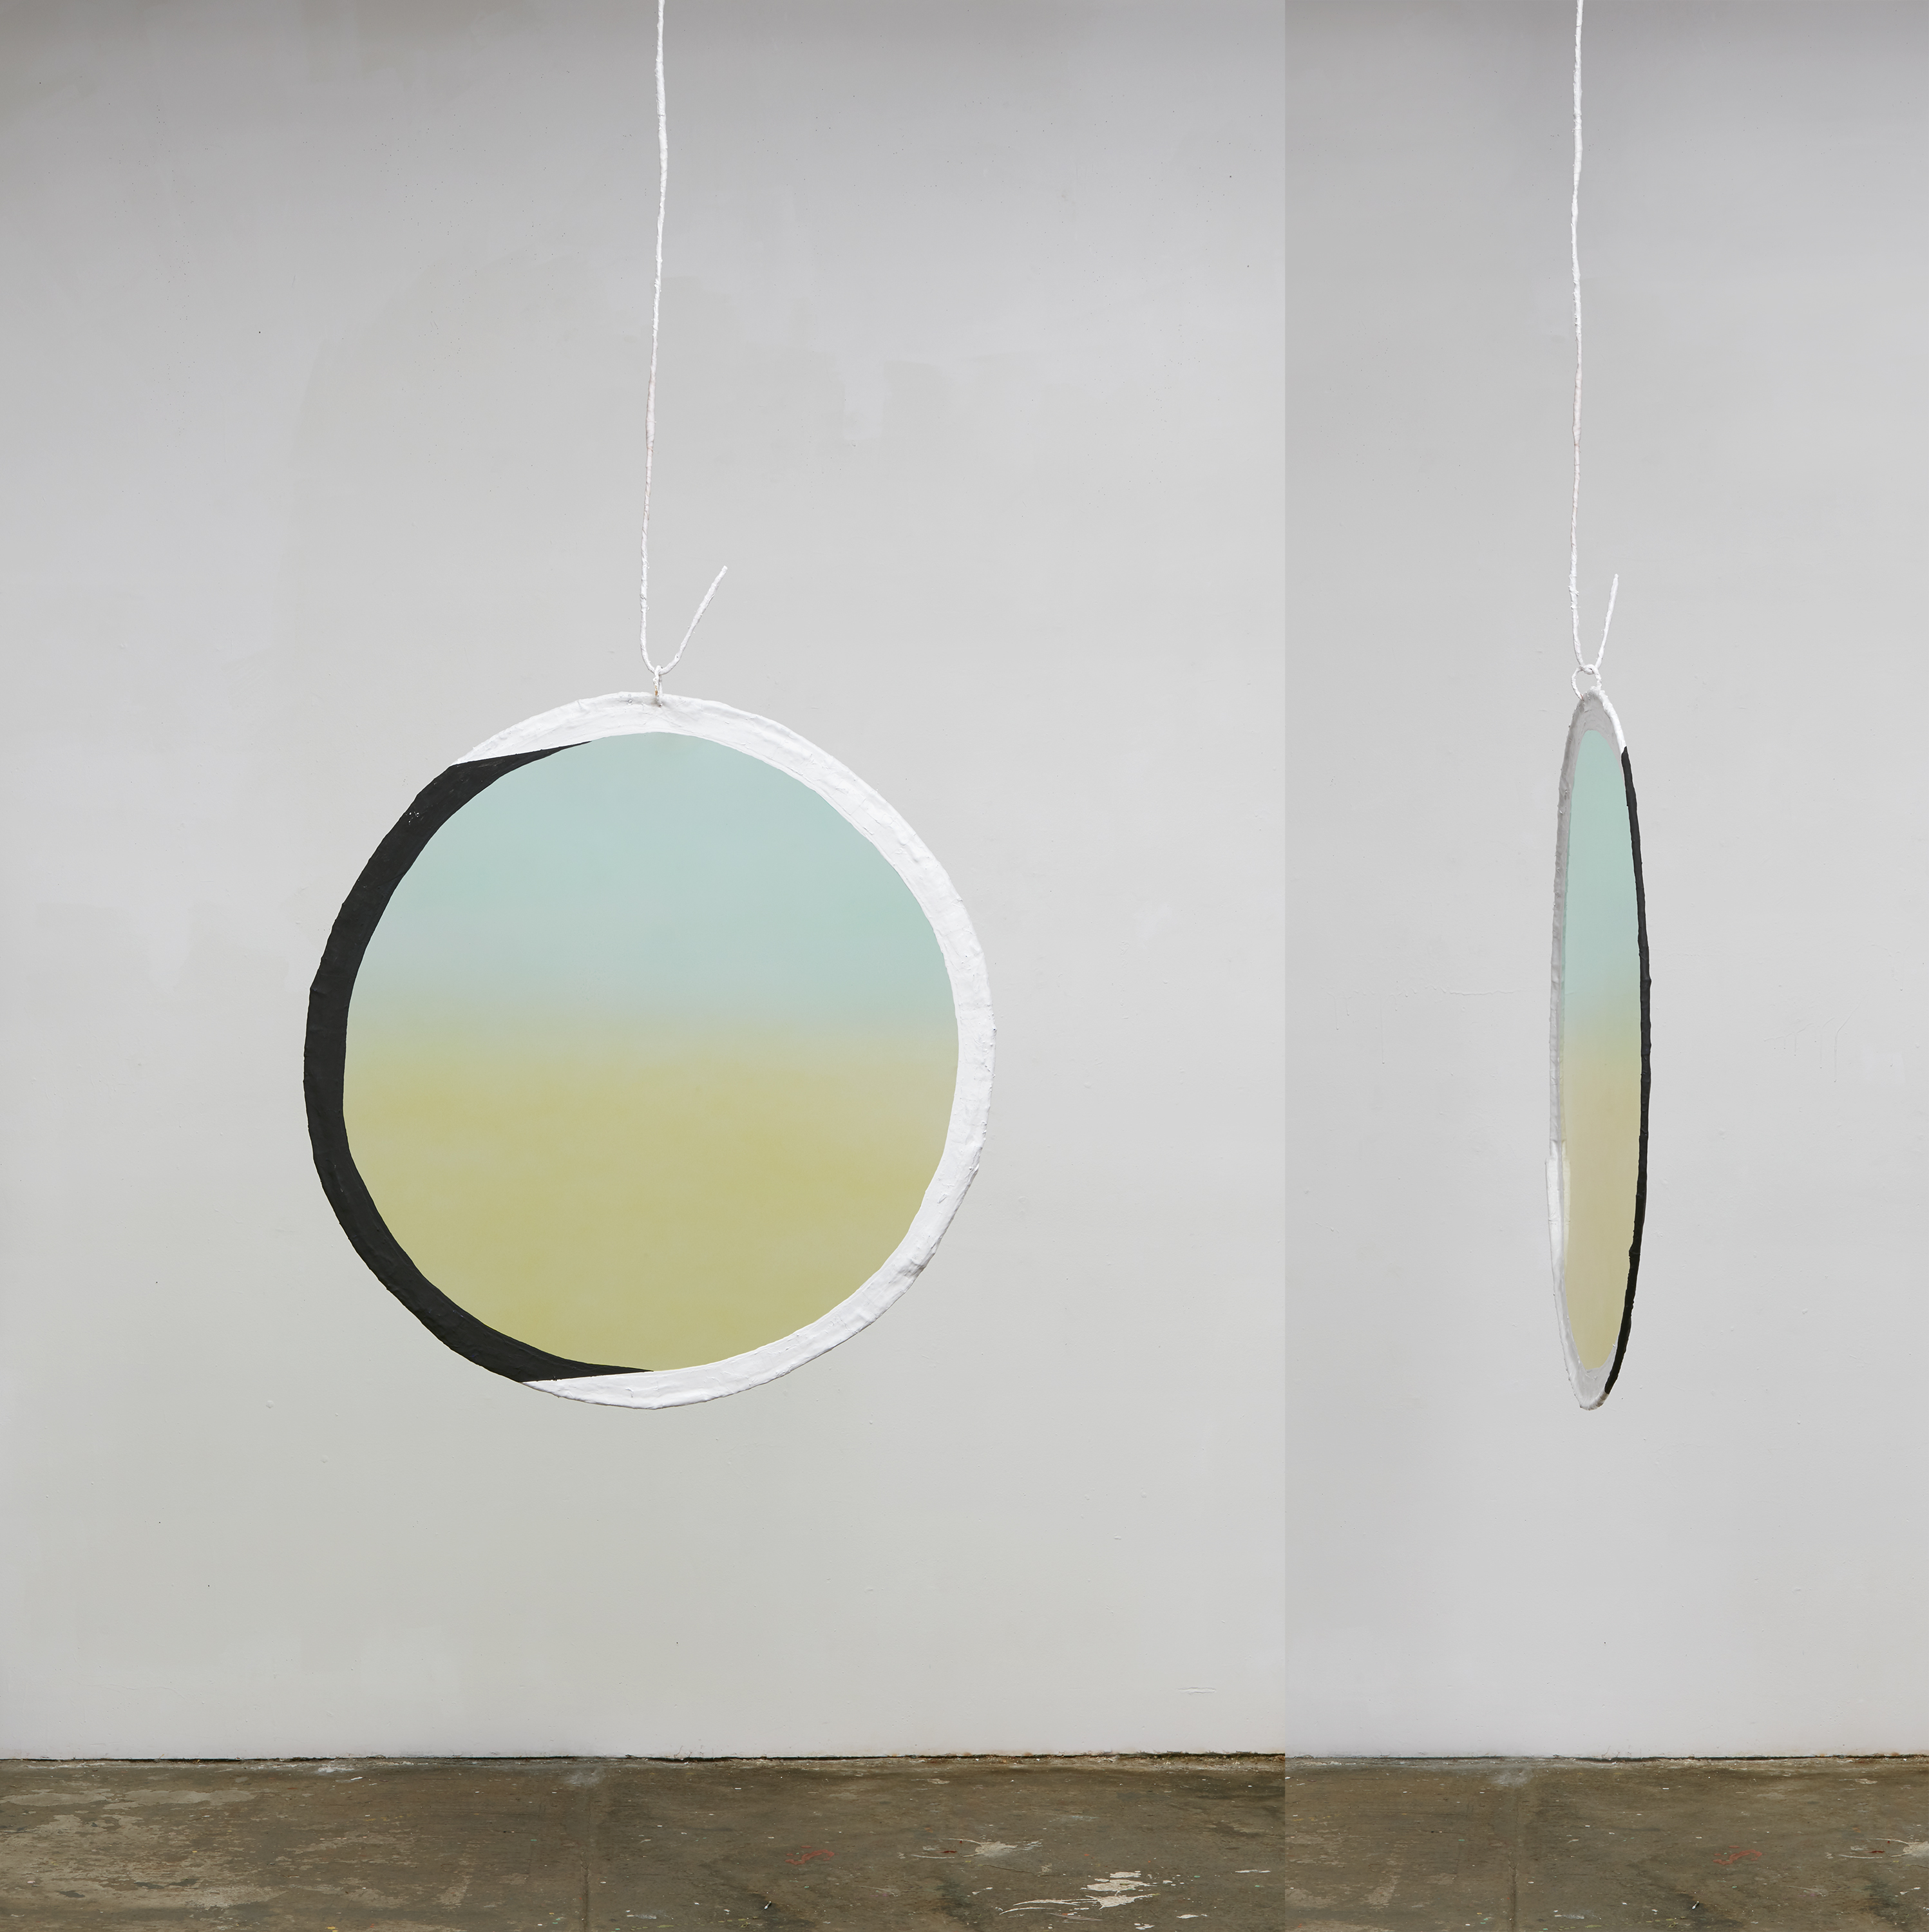 Fabienne Lasserre, Appear, 2020. Linen, steel, transparent vinyl, acrylic polymer, acrylic, urethane and enamel paint. 44 x 46 x ½ in. Photo courtesy of Alan Wiener, Polite Photographic Services.